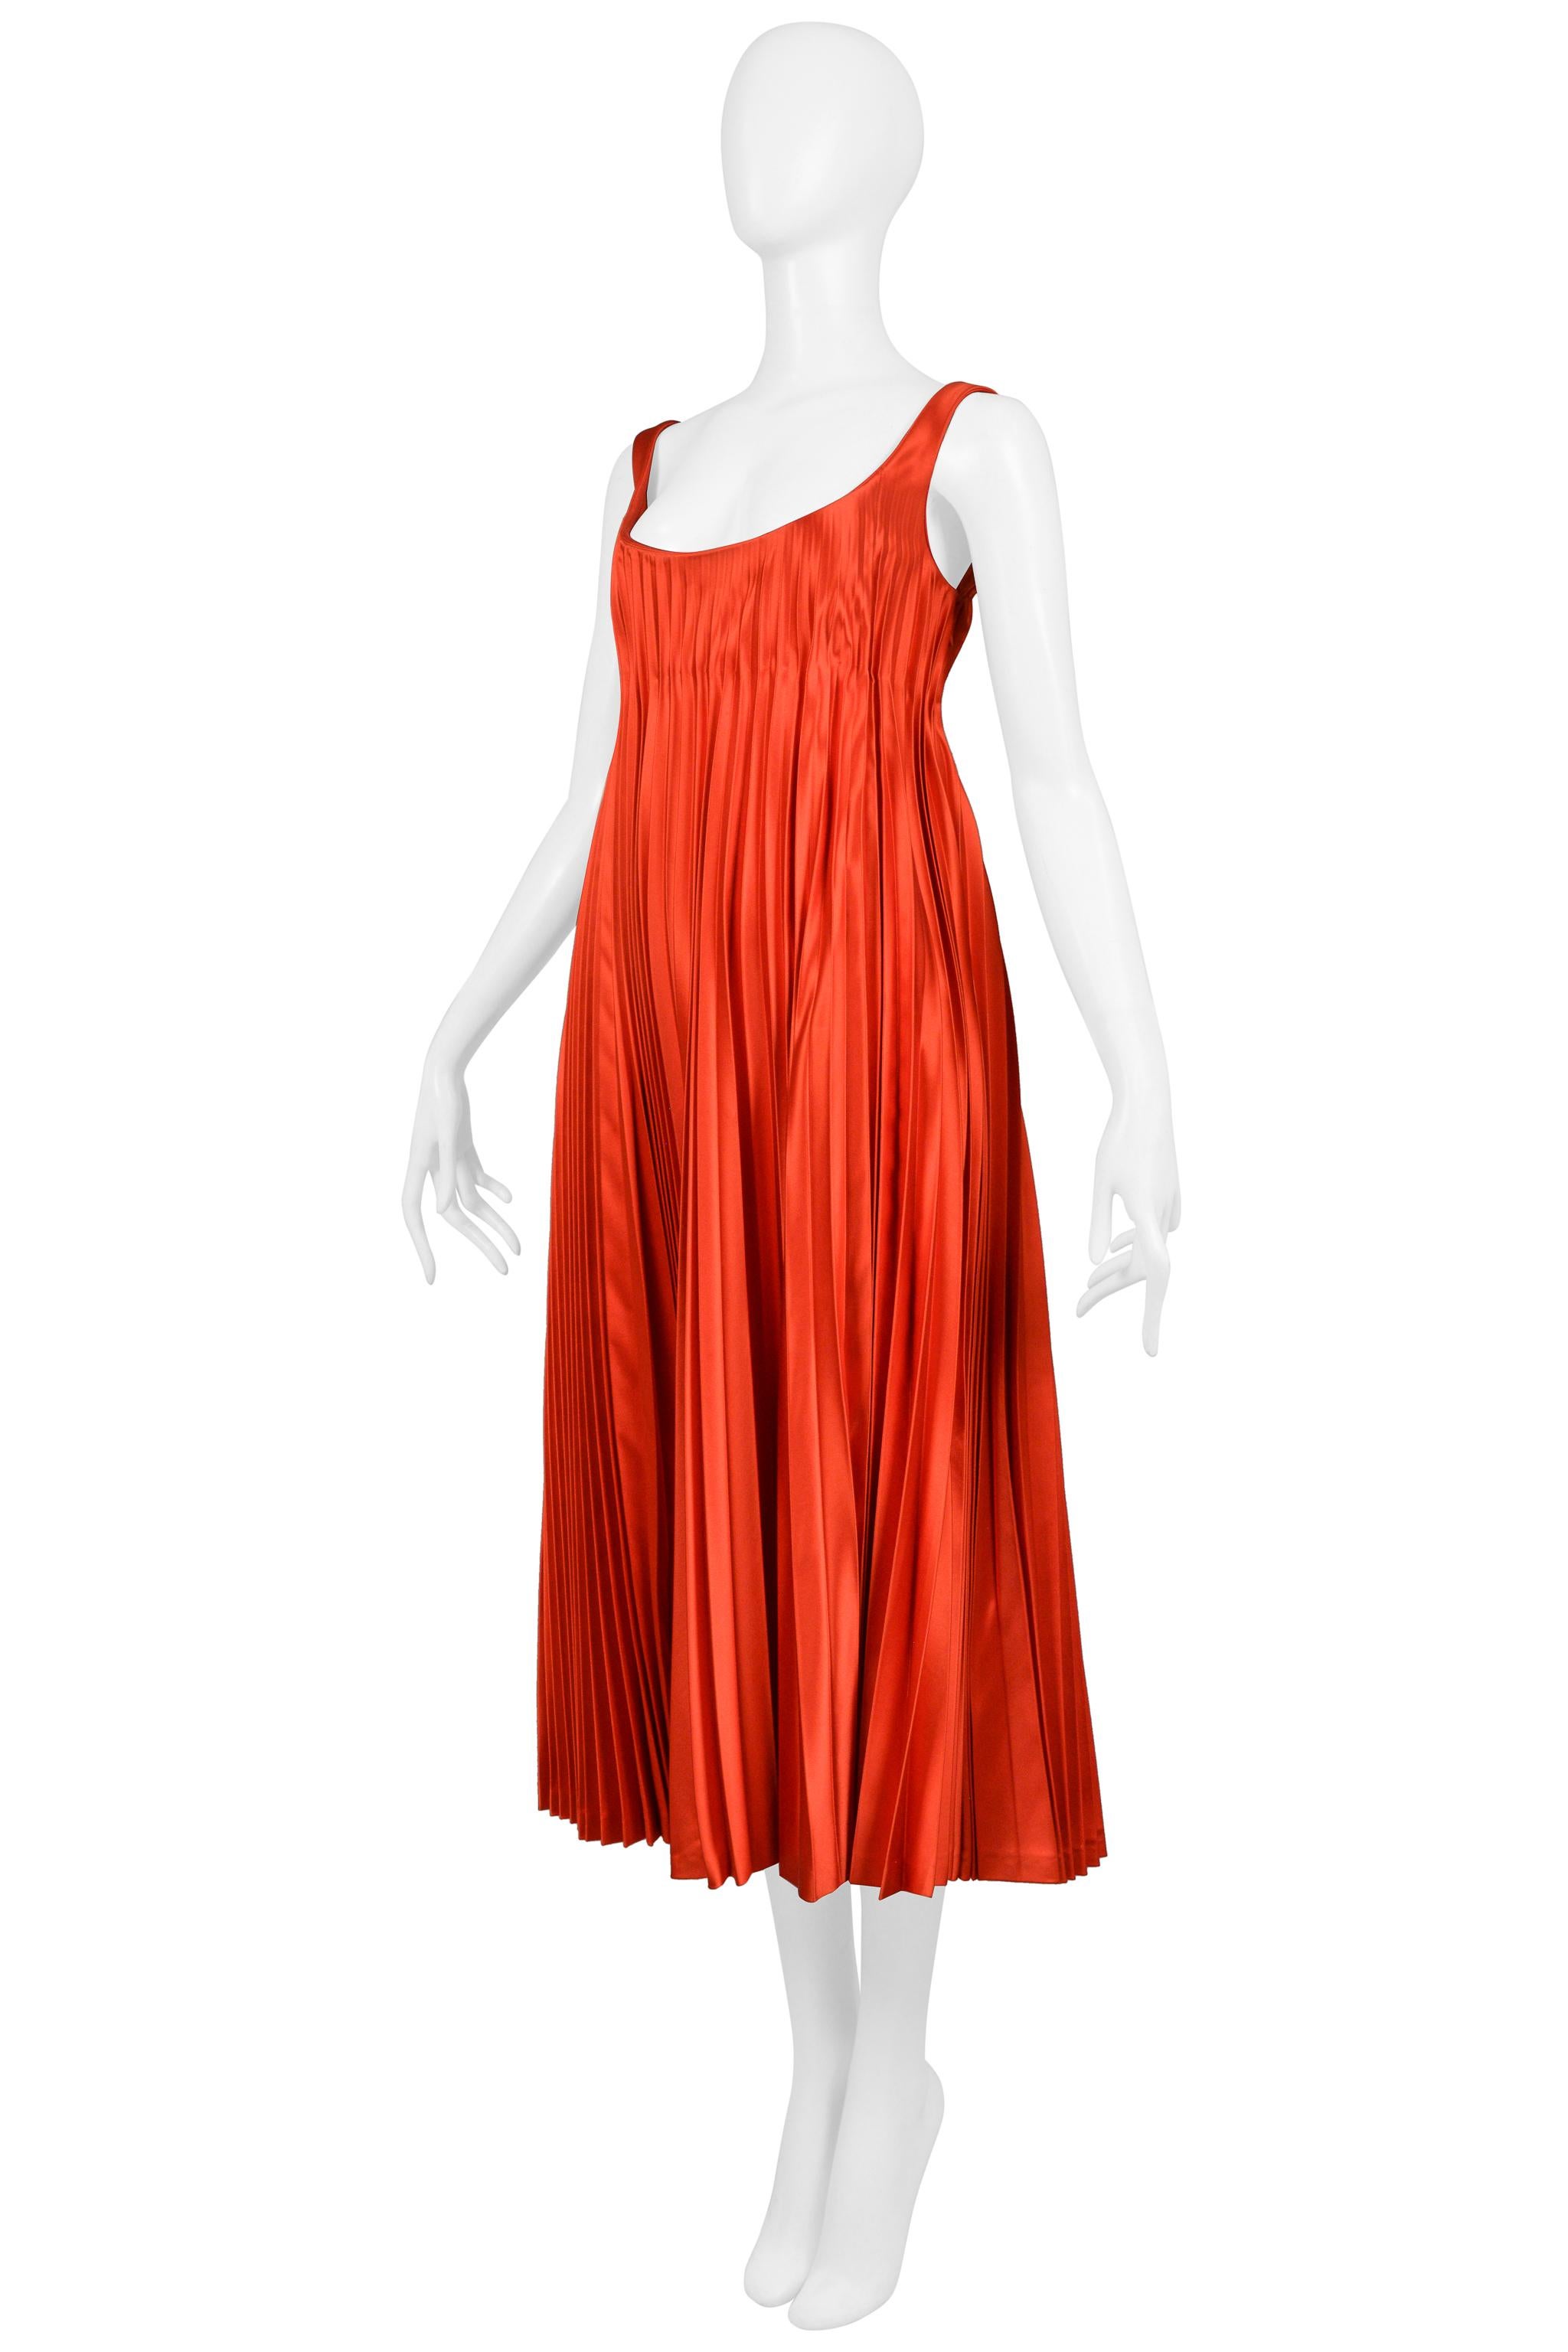 Alexander McQueen Red Satin Pleated Cocktail Dress 2003 For Sale 2